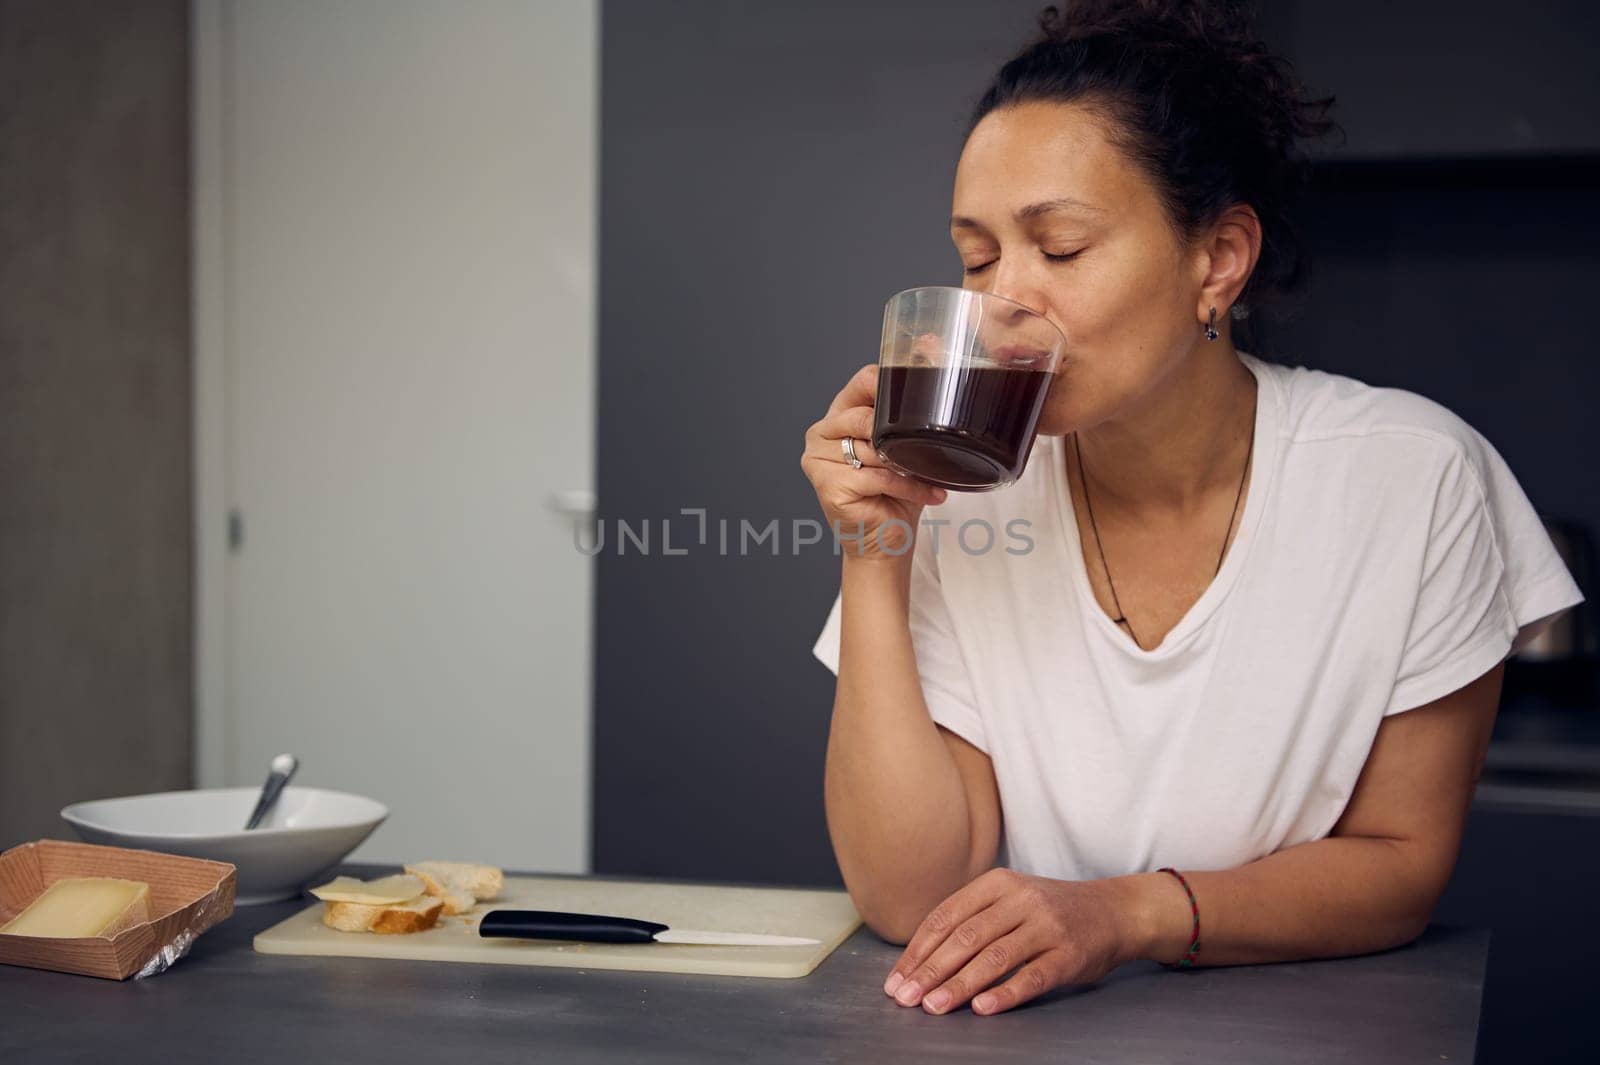 Portrait of relaxed happy woman in pajamas, taking a sip of freshly brewed espresso coffee during her breakfast in the minimalist home kitchen interior. People. Food and drink consumerism by artgf